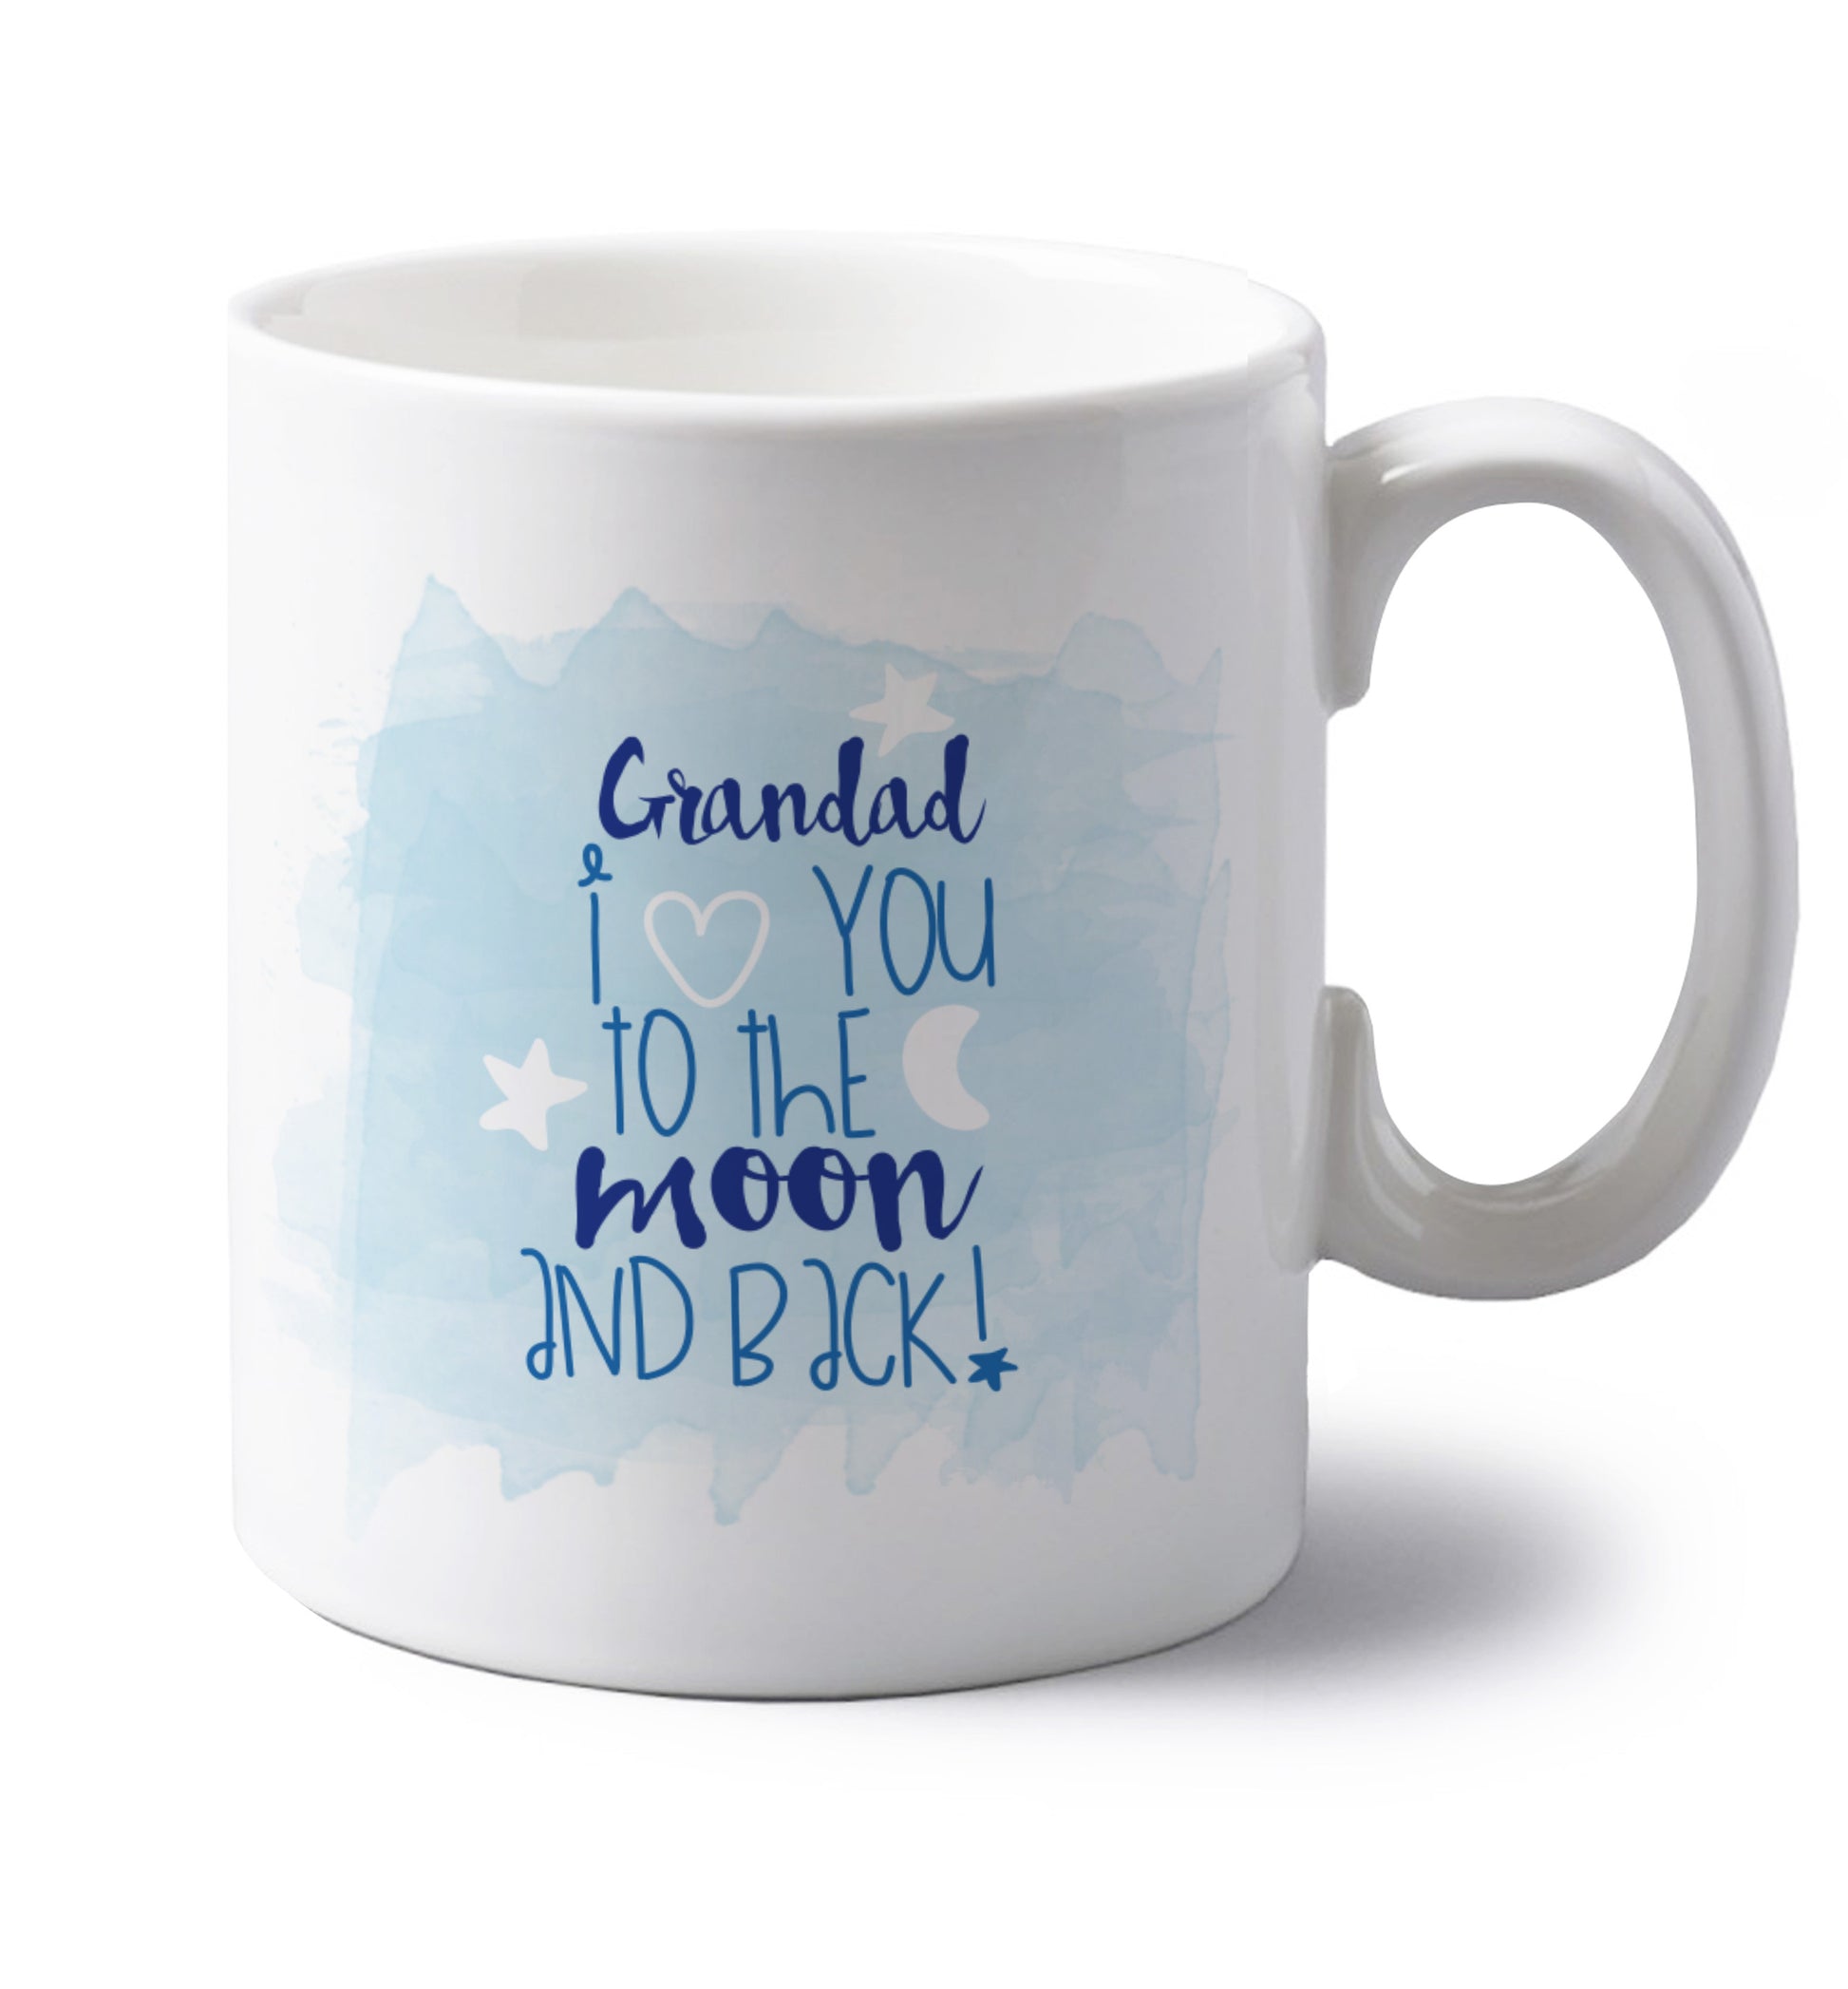 Grandad's I love you to the moon and back left handed white ceramic mug 